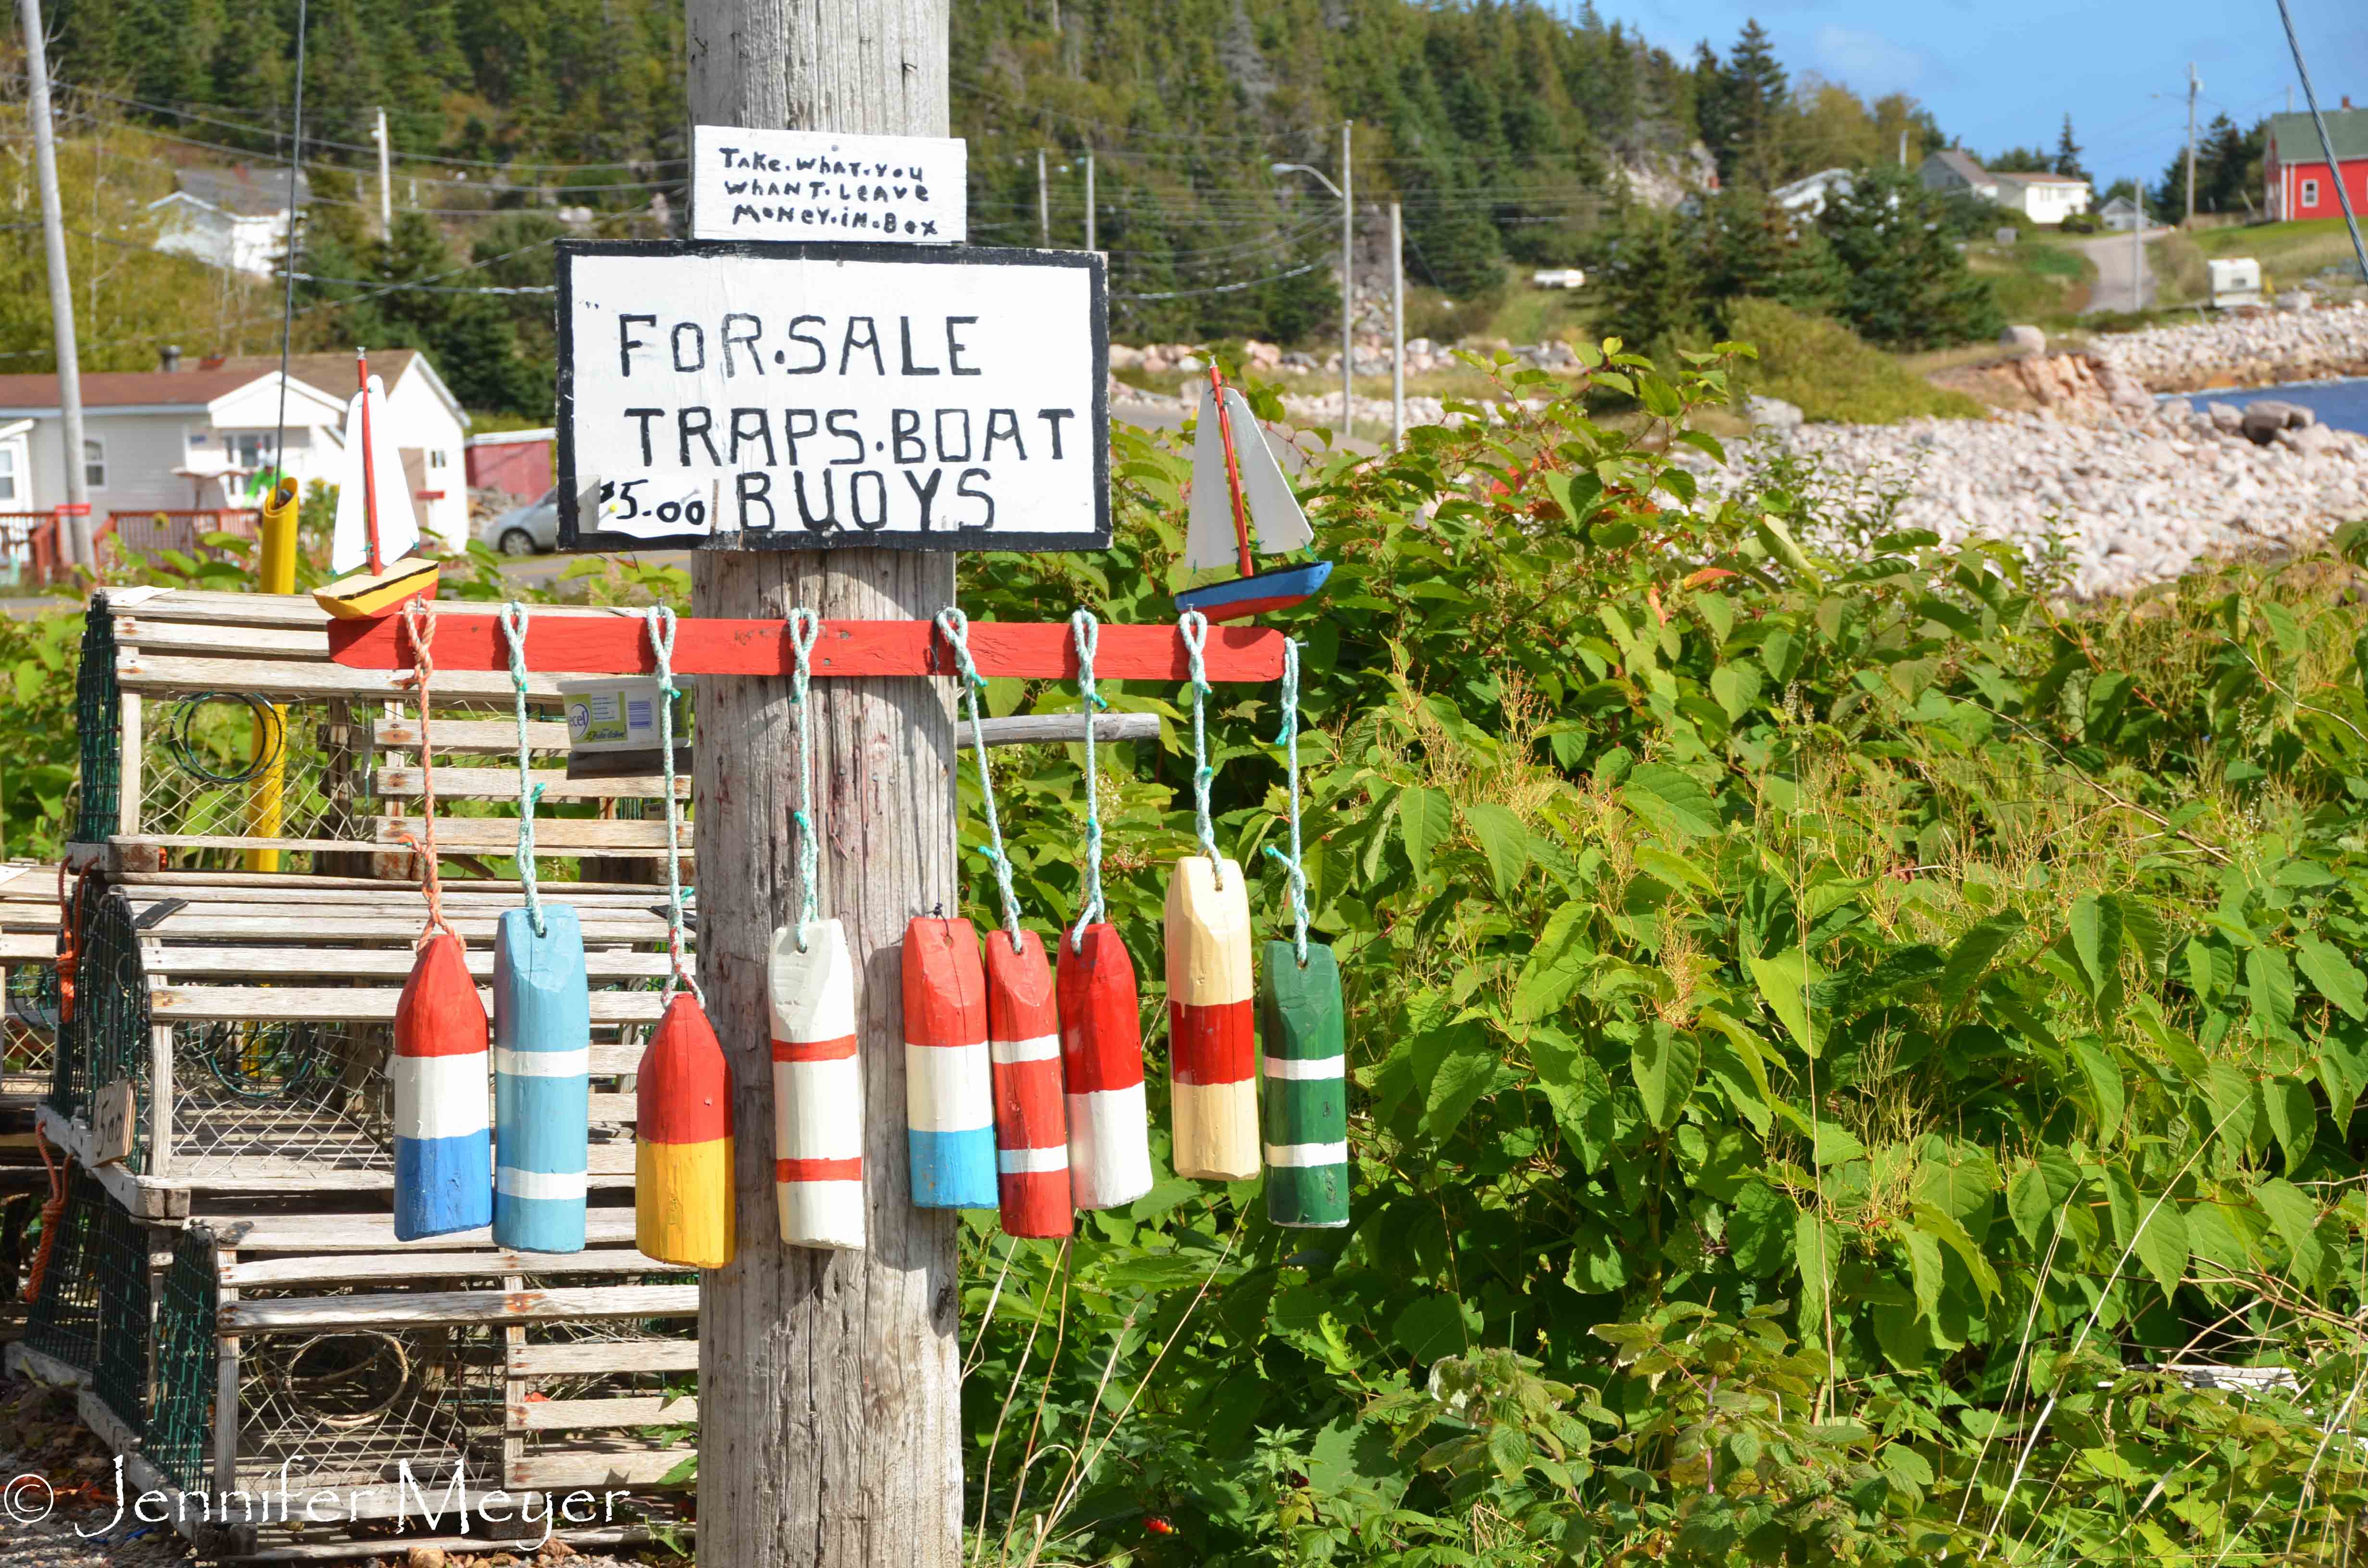 Buoys and boats for sale.